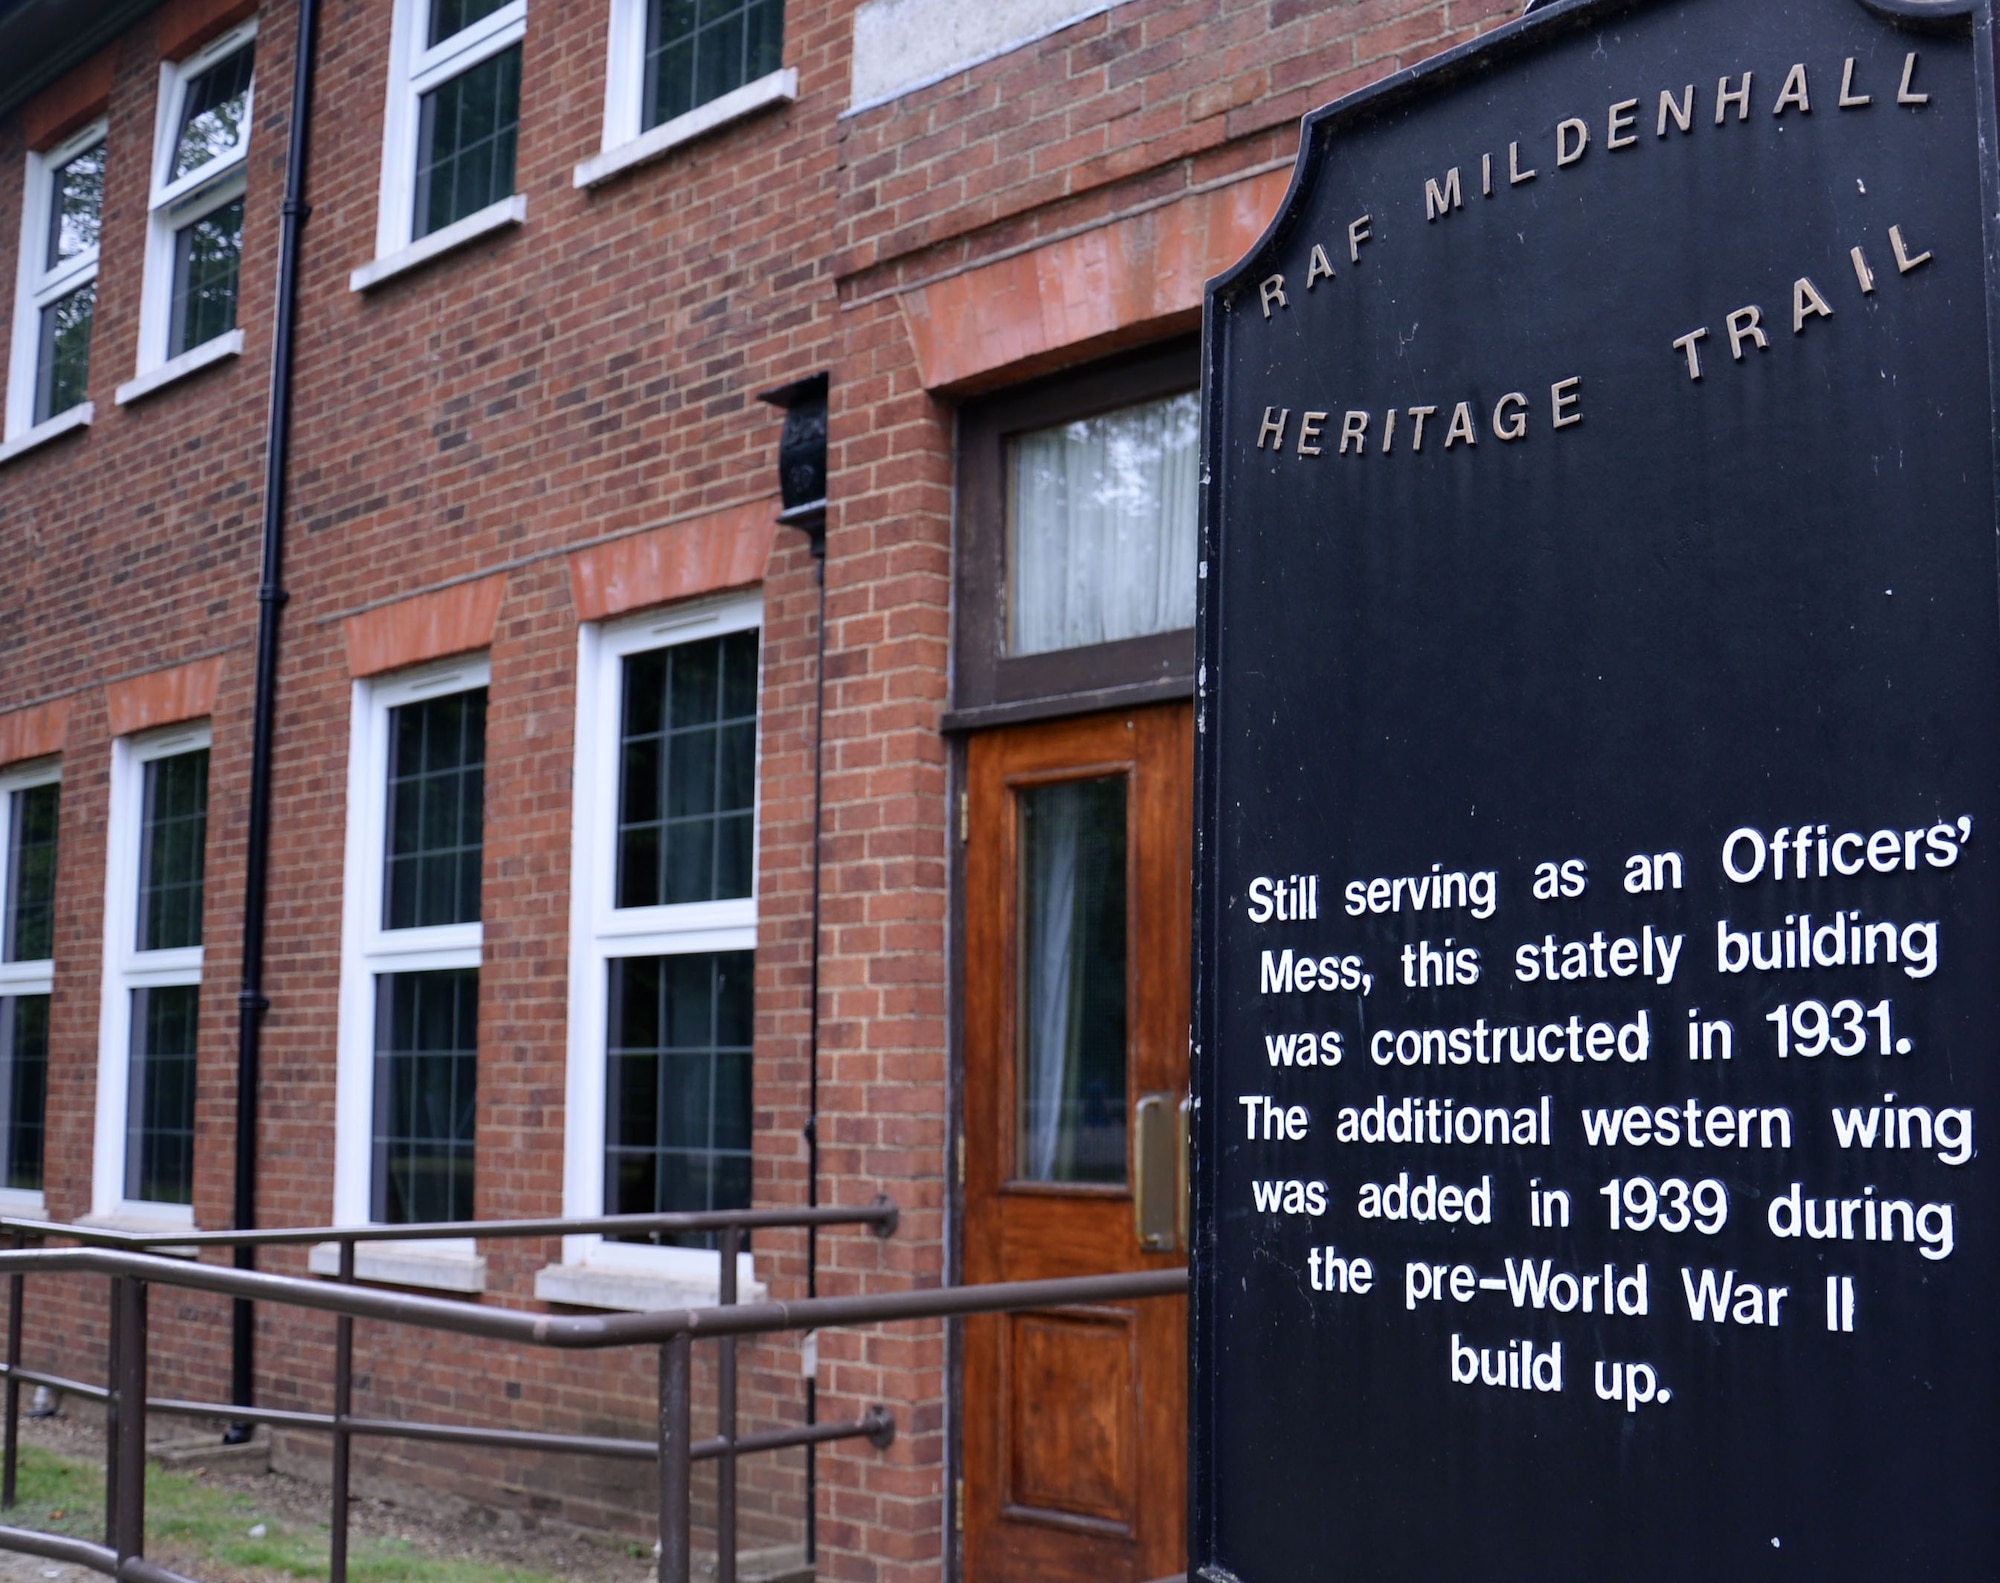 A heritage trail sign stands outside Middleton Hall Aug. 4, 2016, on RAF Mildenhall, England. In 1931 contractors completed the first buildings on base, including what is known today as Middleton Hall. (U.S. Air Force photo by Gina Randall)